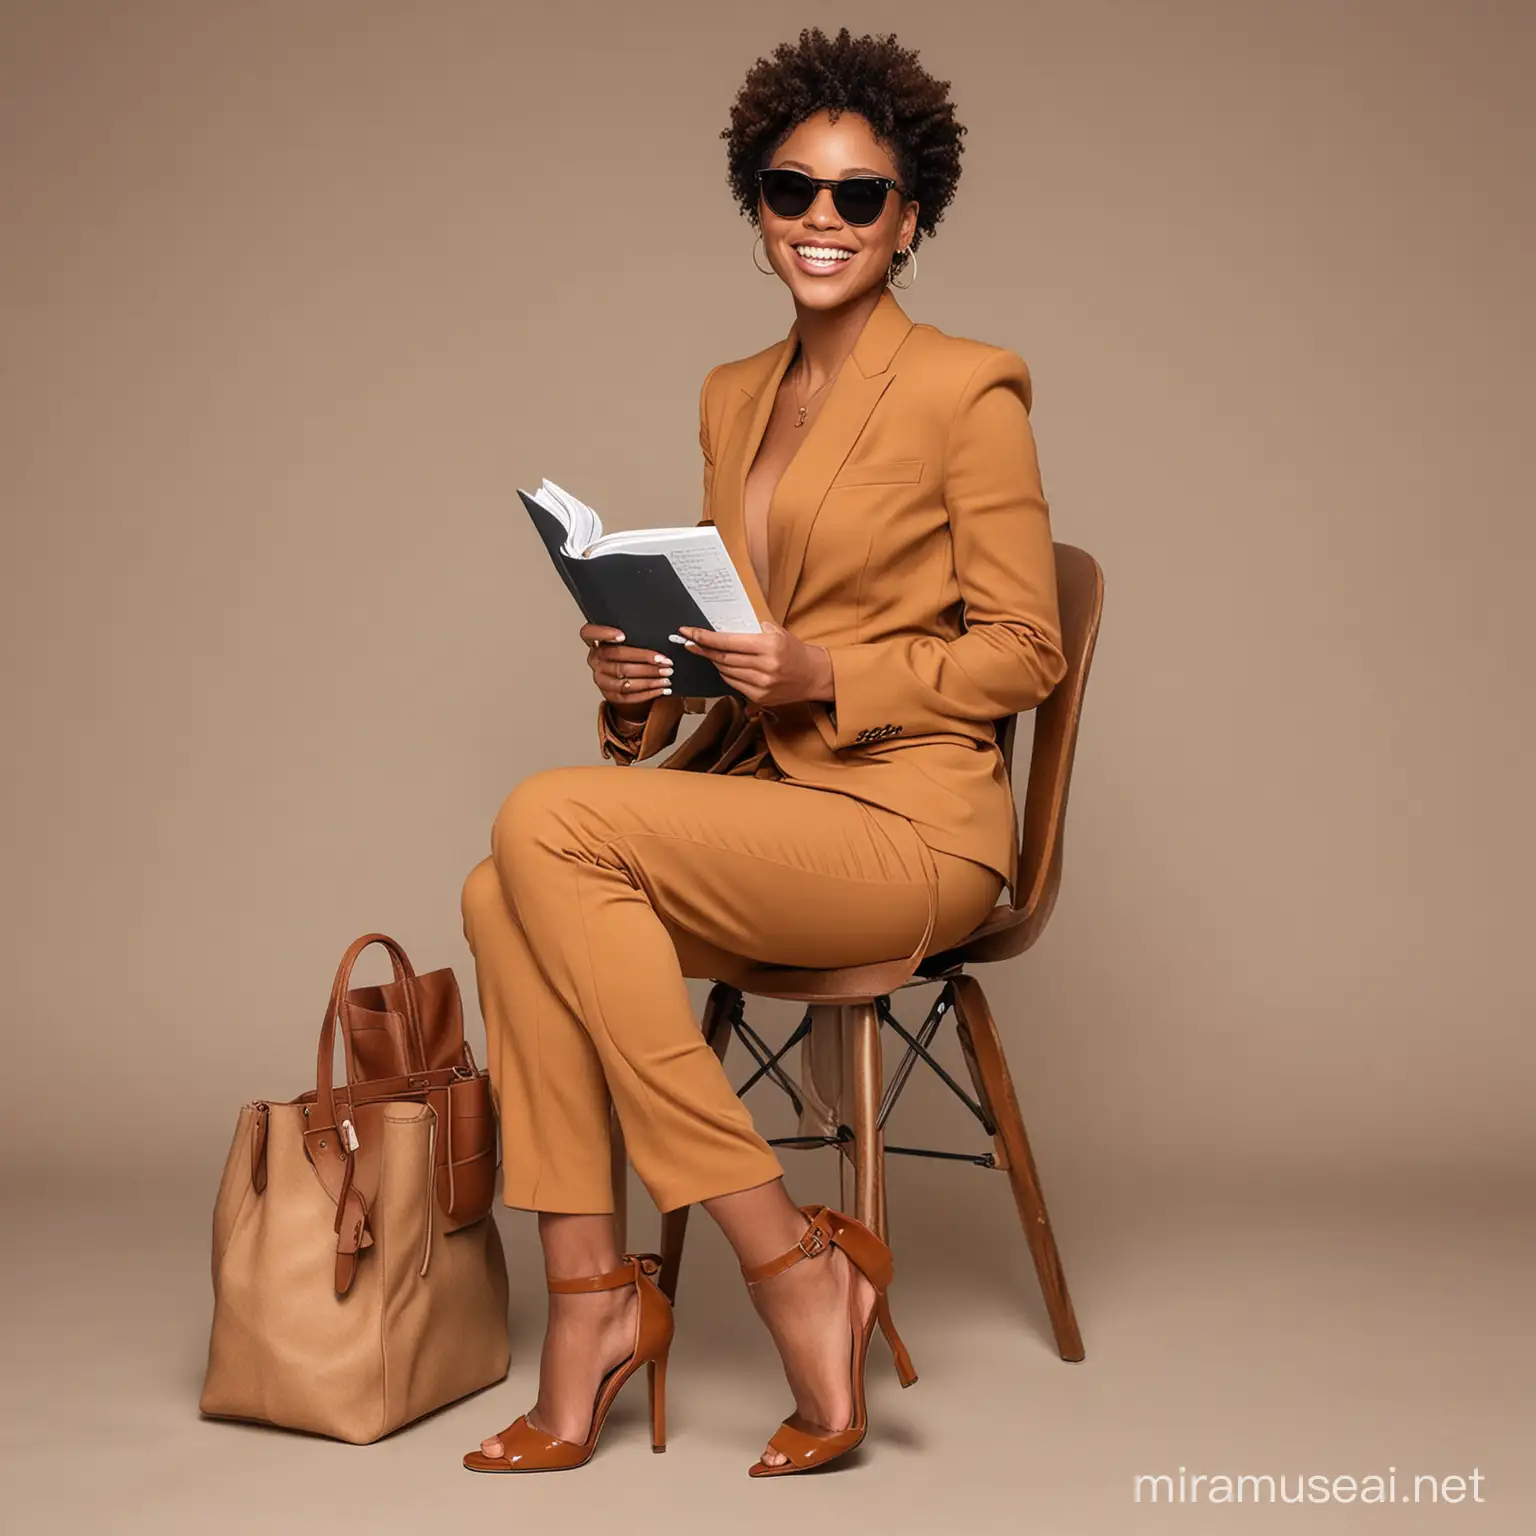 Stylish Black Woman in Brown Suit with Journal and Fashion Purse